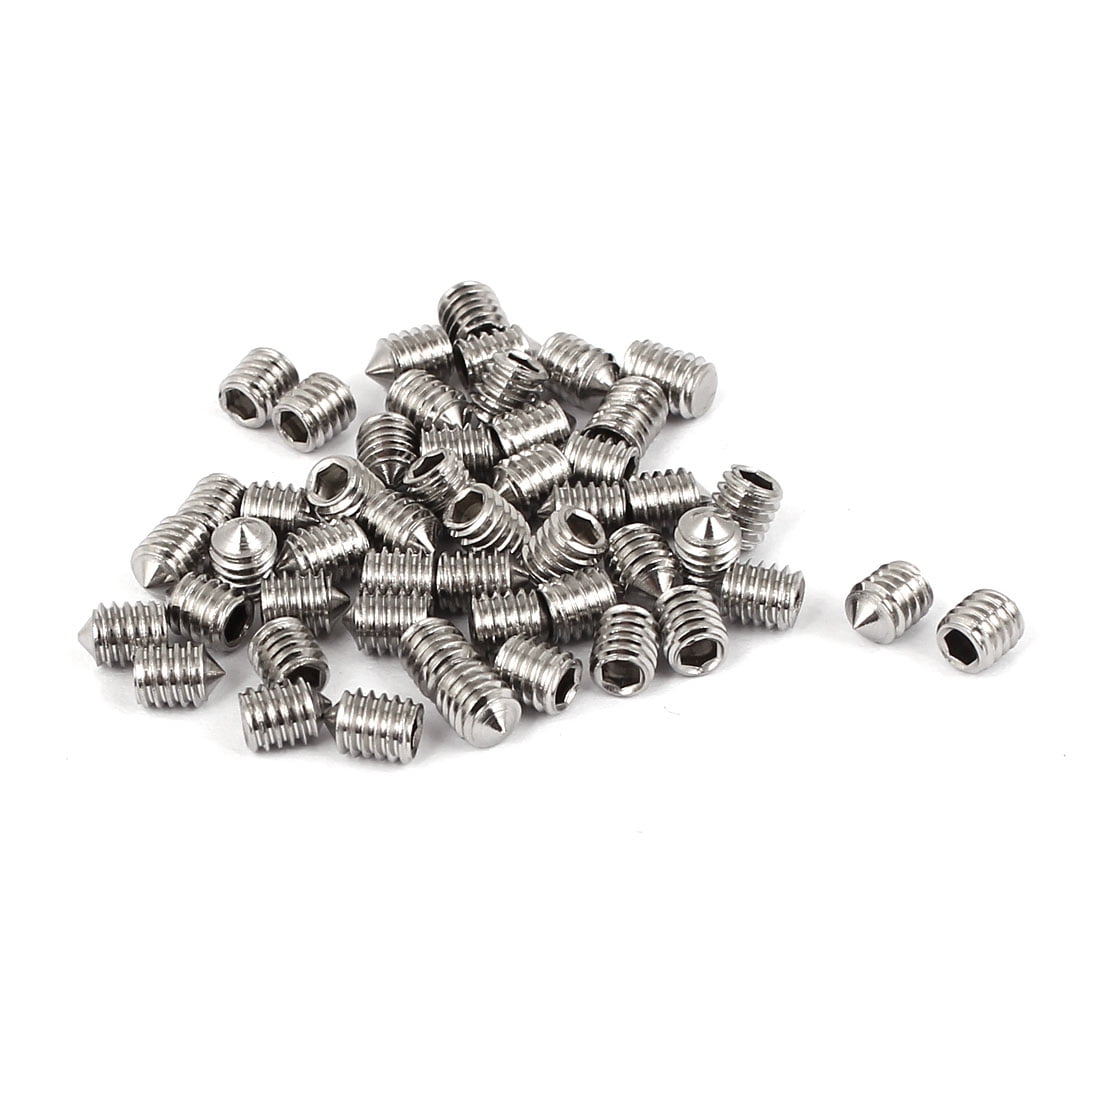 50Pcs M4 Hex Socket Set Stainless Steel Grub Screw with Cone Point Screws 